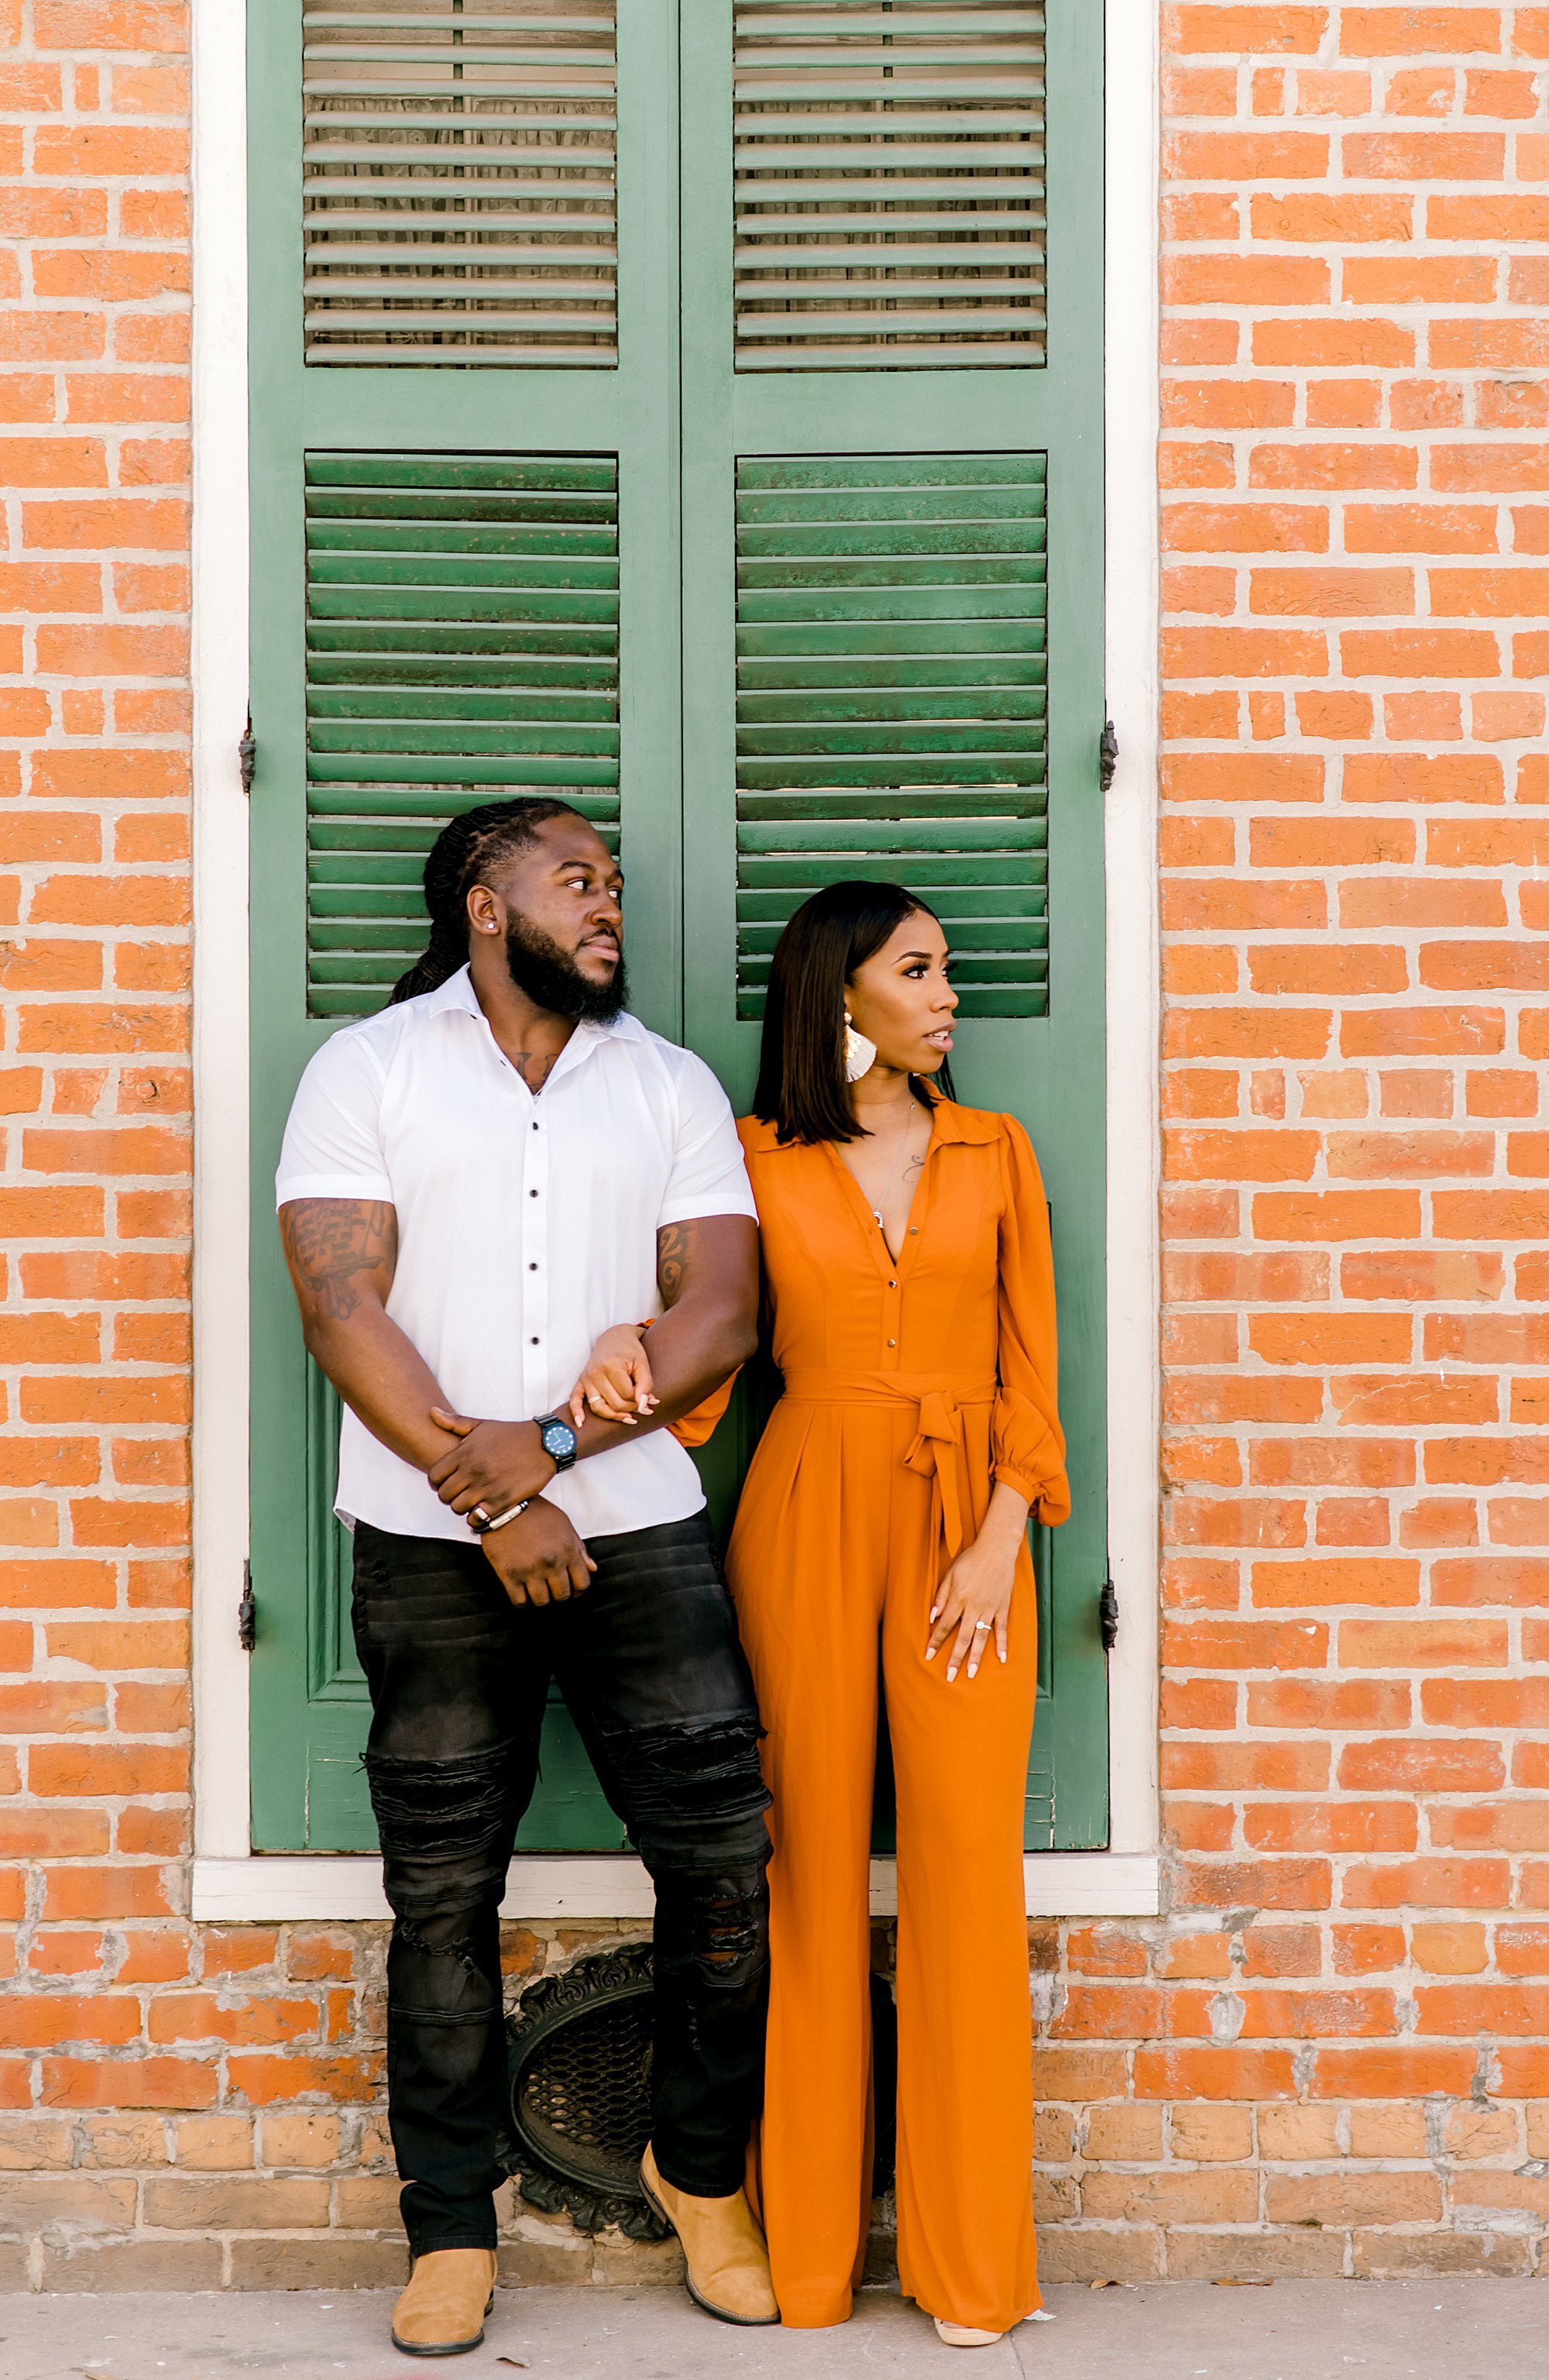 French Quarter Engagement Shoot-New Orleans French Quarter-New Orleans Photographer_0126.jpg